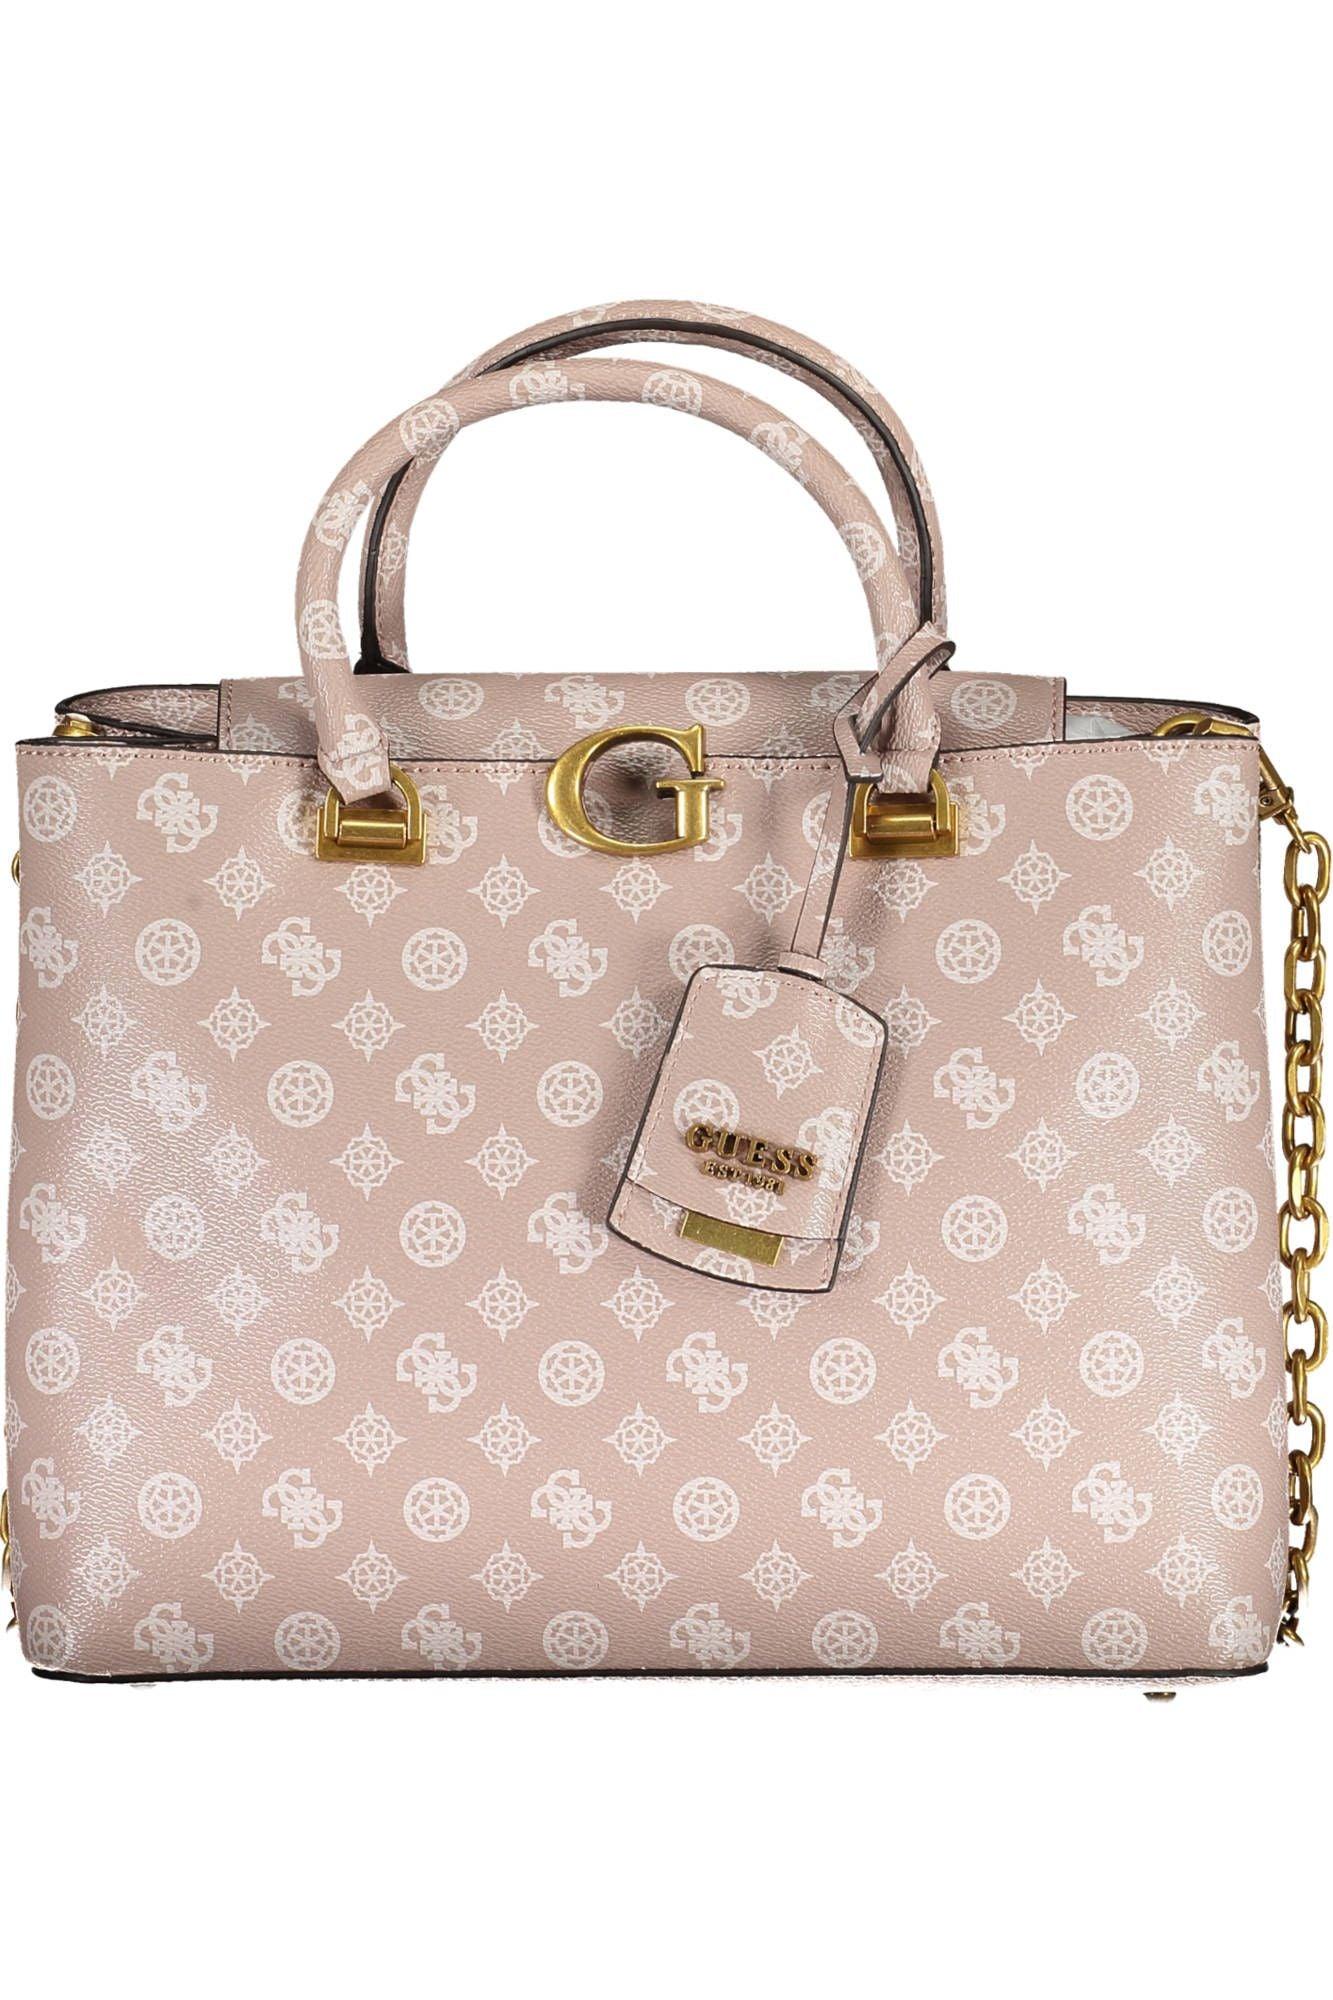 Guess Jeans Chic Pink Two-Handle Guess Handbag with Chain Strap - PER.FASHION